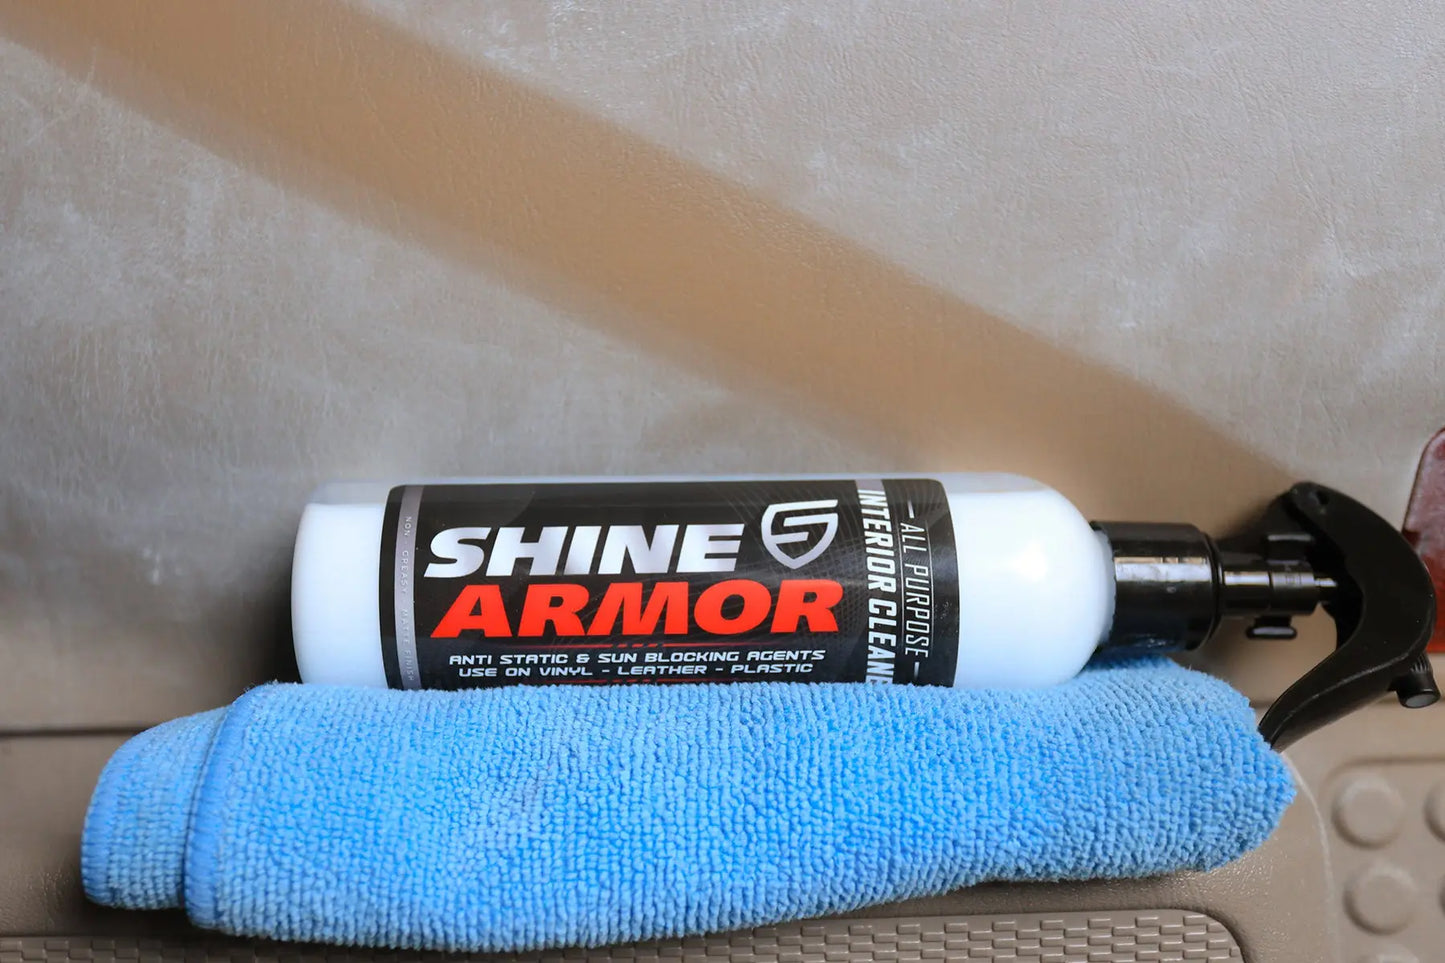 What Can I Use to Clean the Interior Plastic of My Car? – Shine Armor